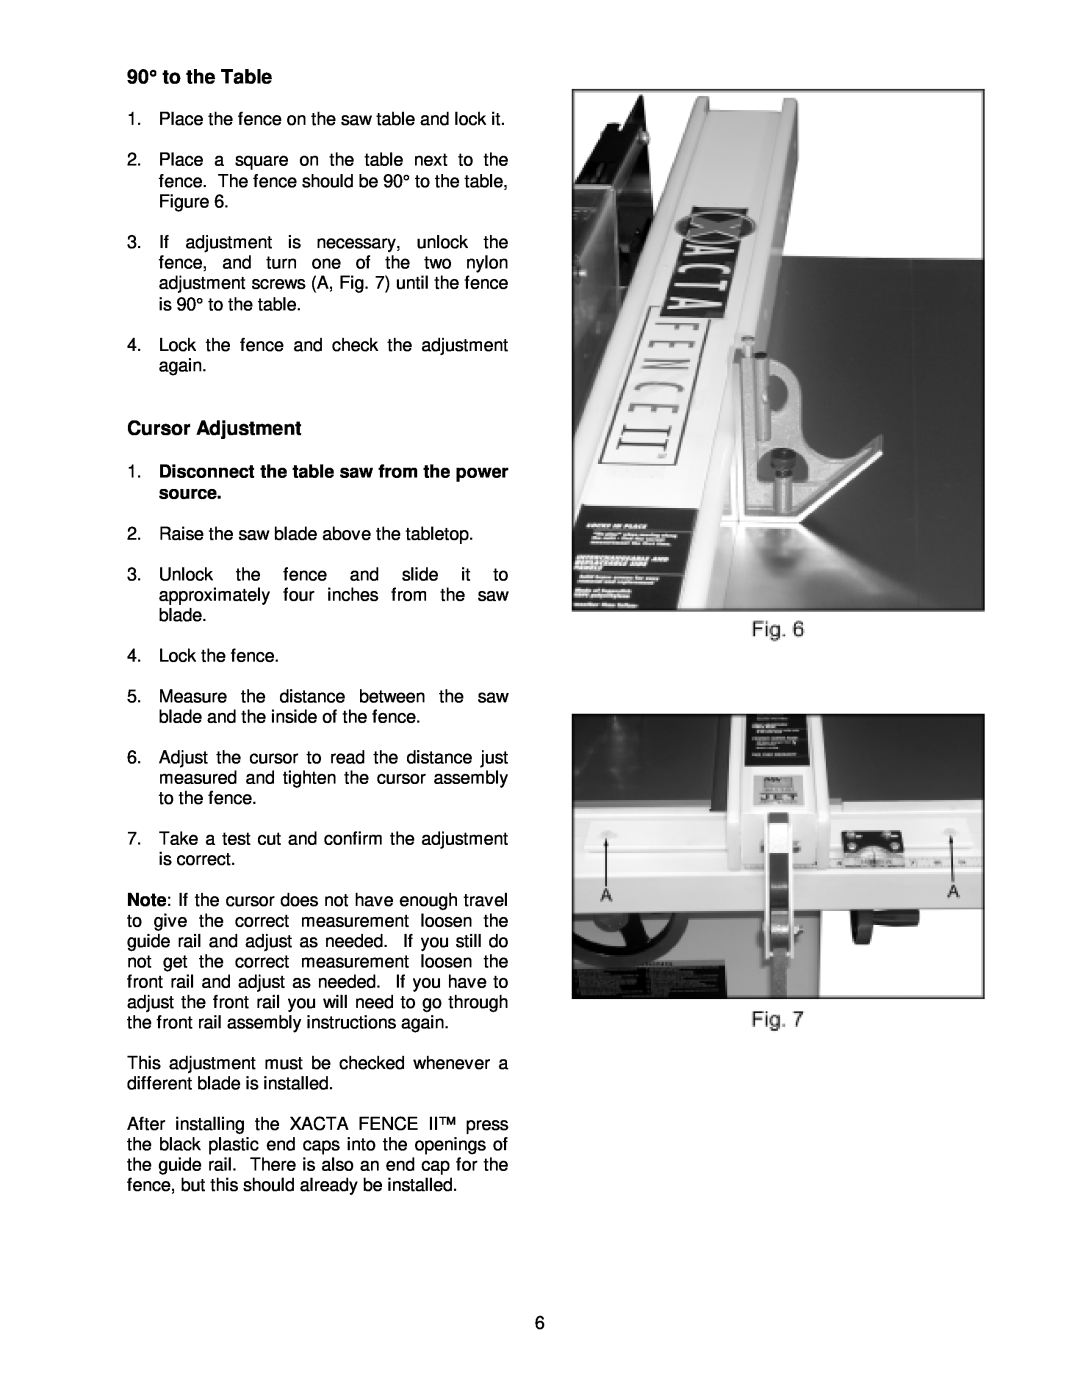 Jet Tools 30, 50 owner manual to the Table, Cursor Adjustment, Disconnect the table saw from the power source 